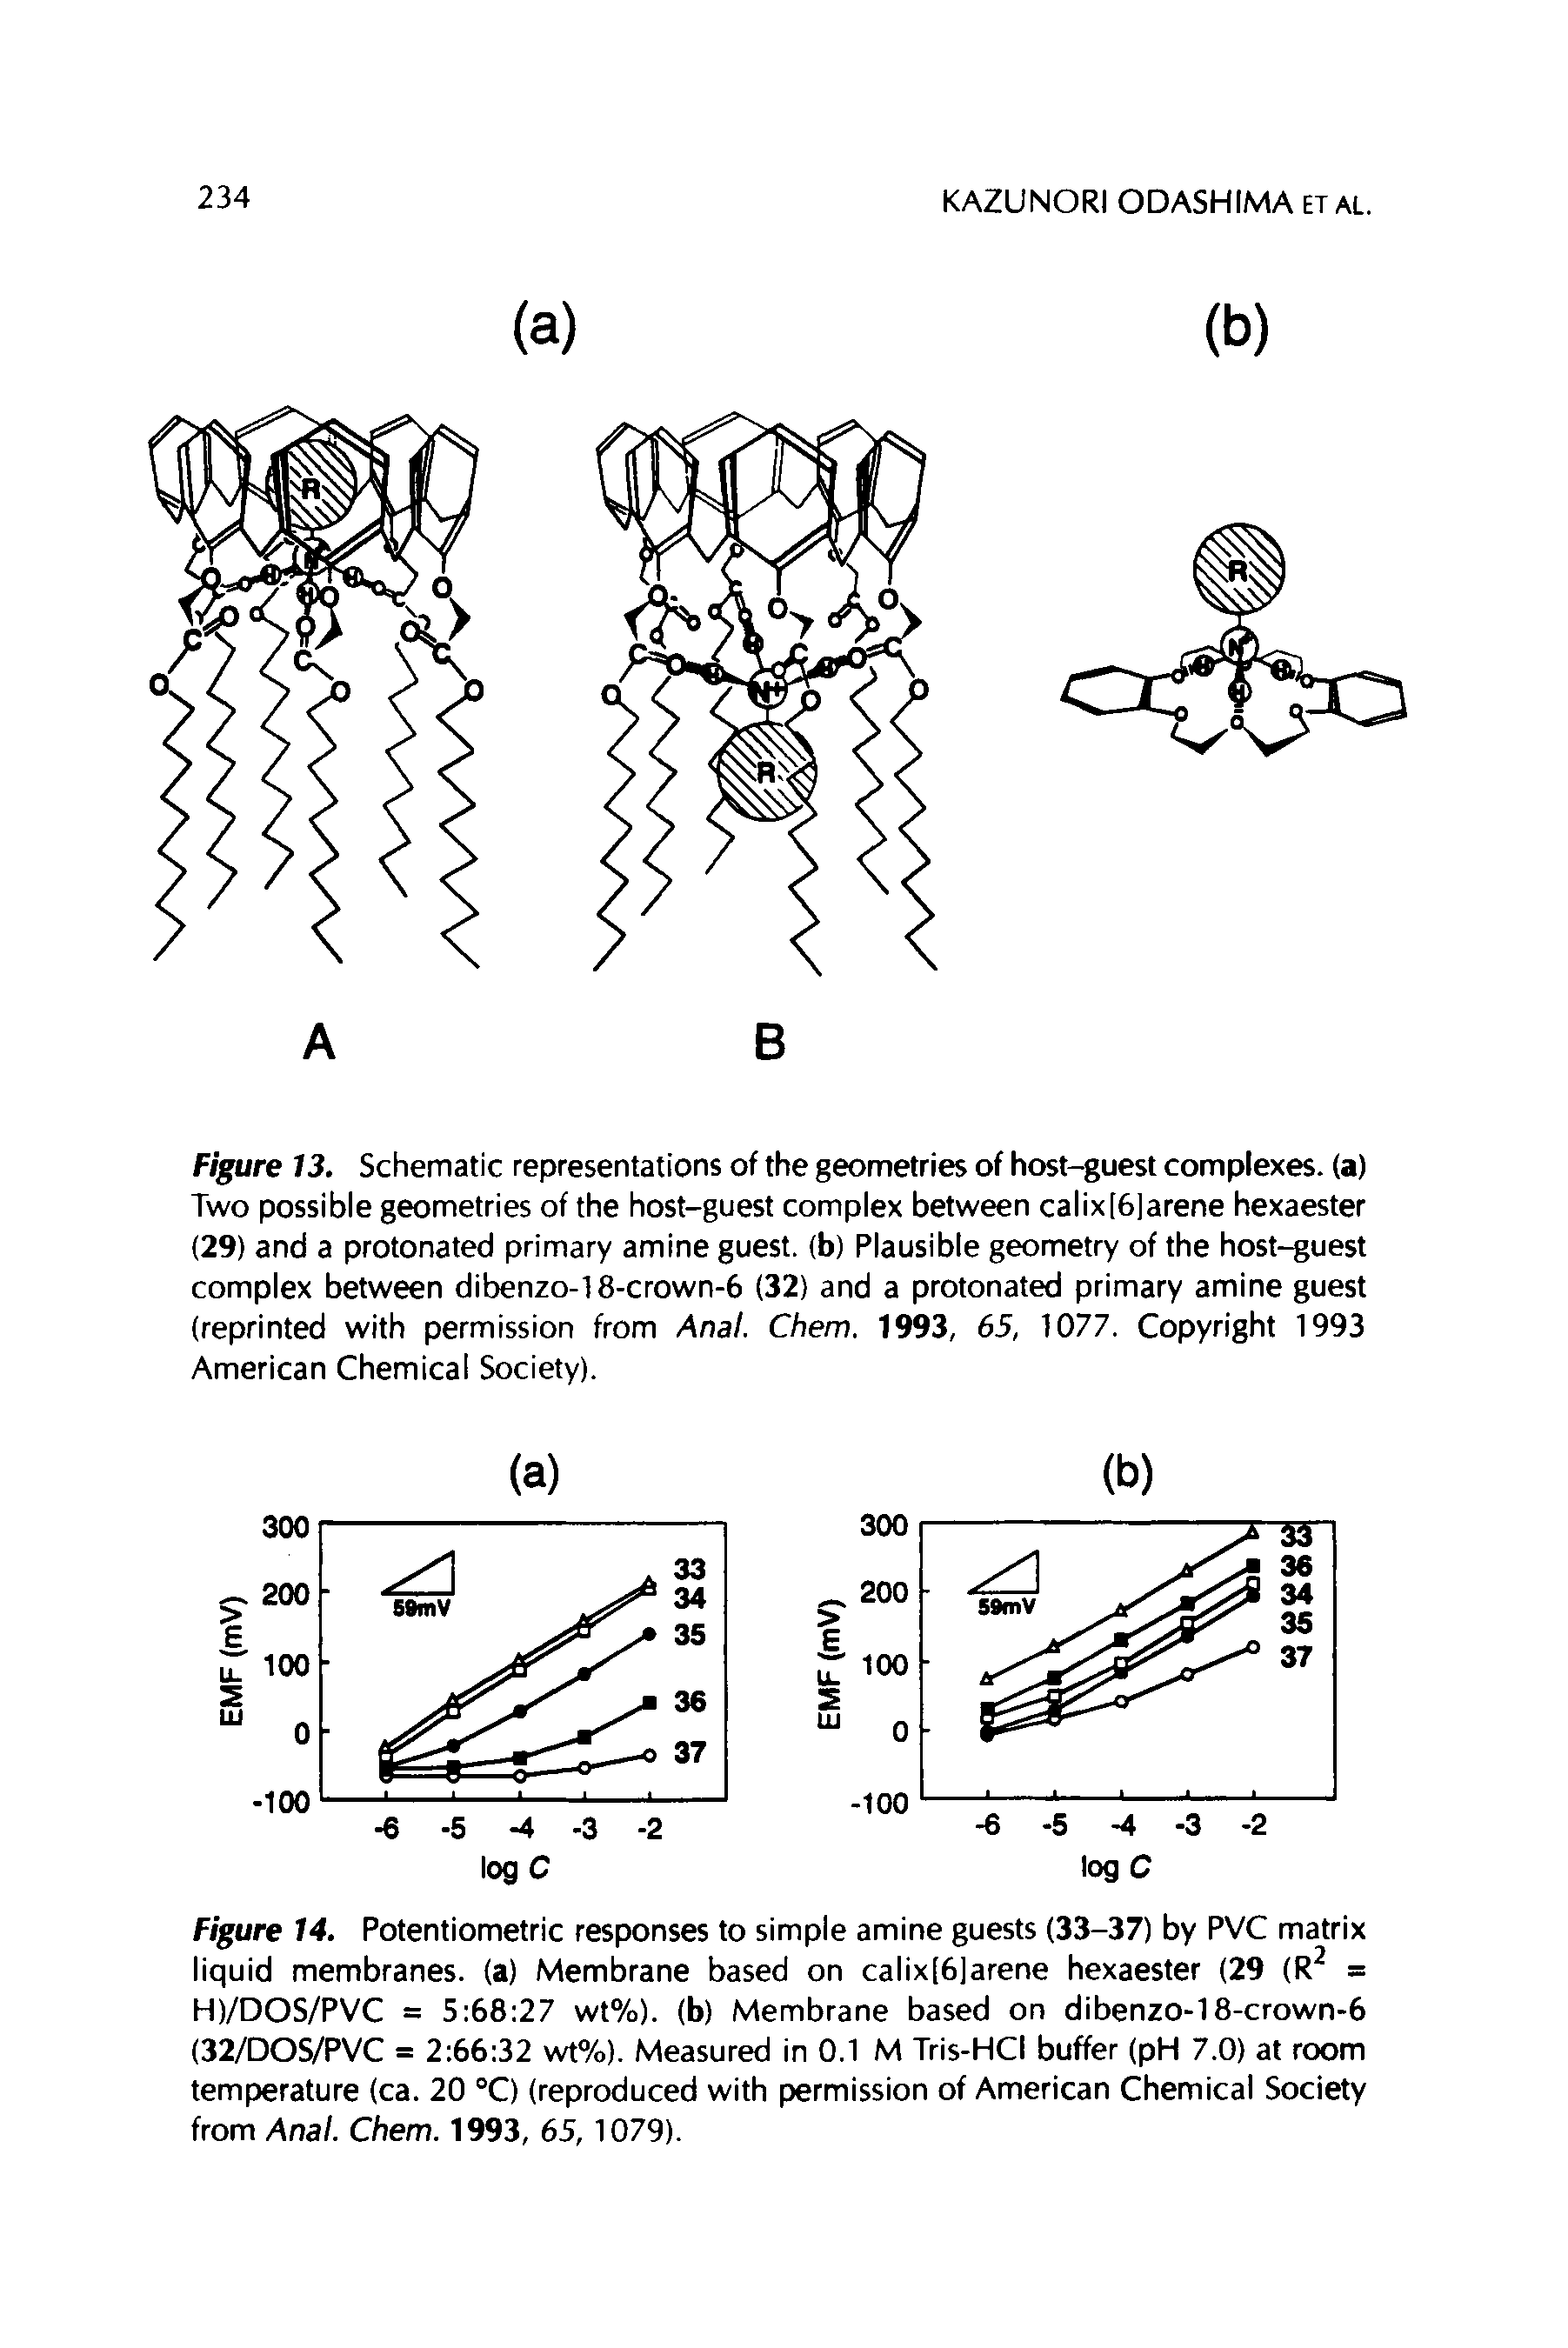 Figure 13. Schematic representations of the geometries of host-guest complexes, (a) Two possible geometries of the host-guest complex between calix[6]arene hexaester (29) and a protonated primary amine guest, (b) Plausible geometry of the host-guest complex between dibenzo-18-crown-6 (32) and a protonated primary amine guest (reprinted with permission from Anal. Chem. 1993, 65, 1077. Copyright 1993 American Chemical Society).